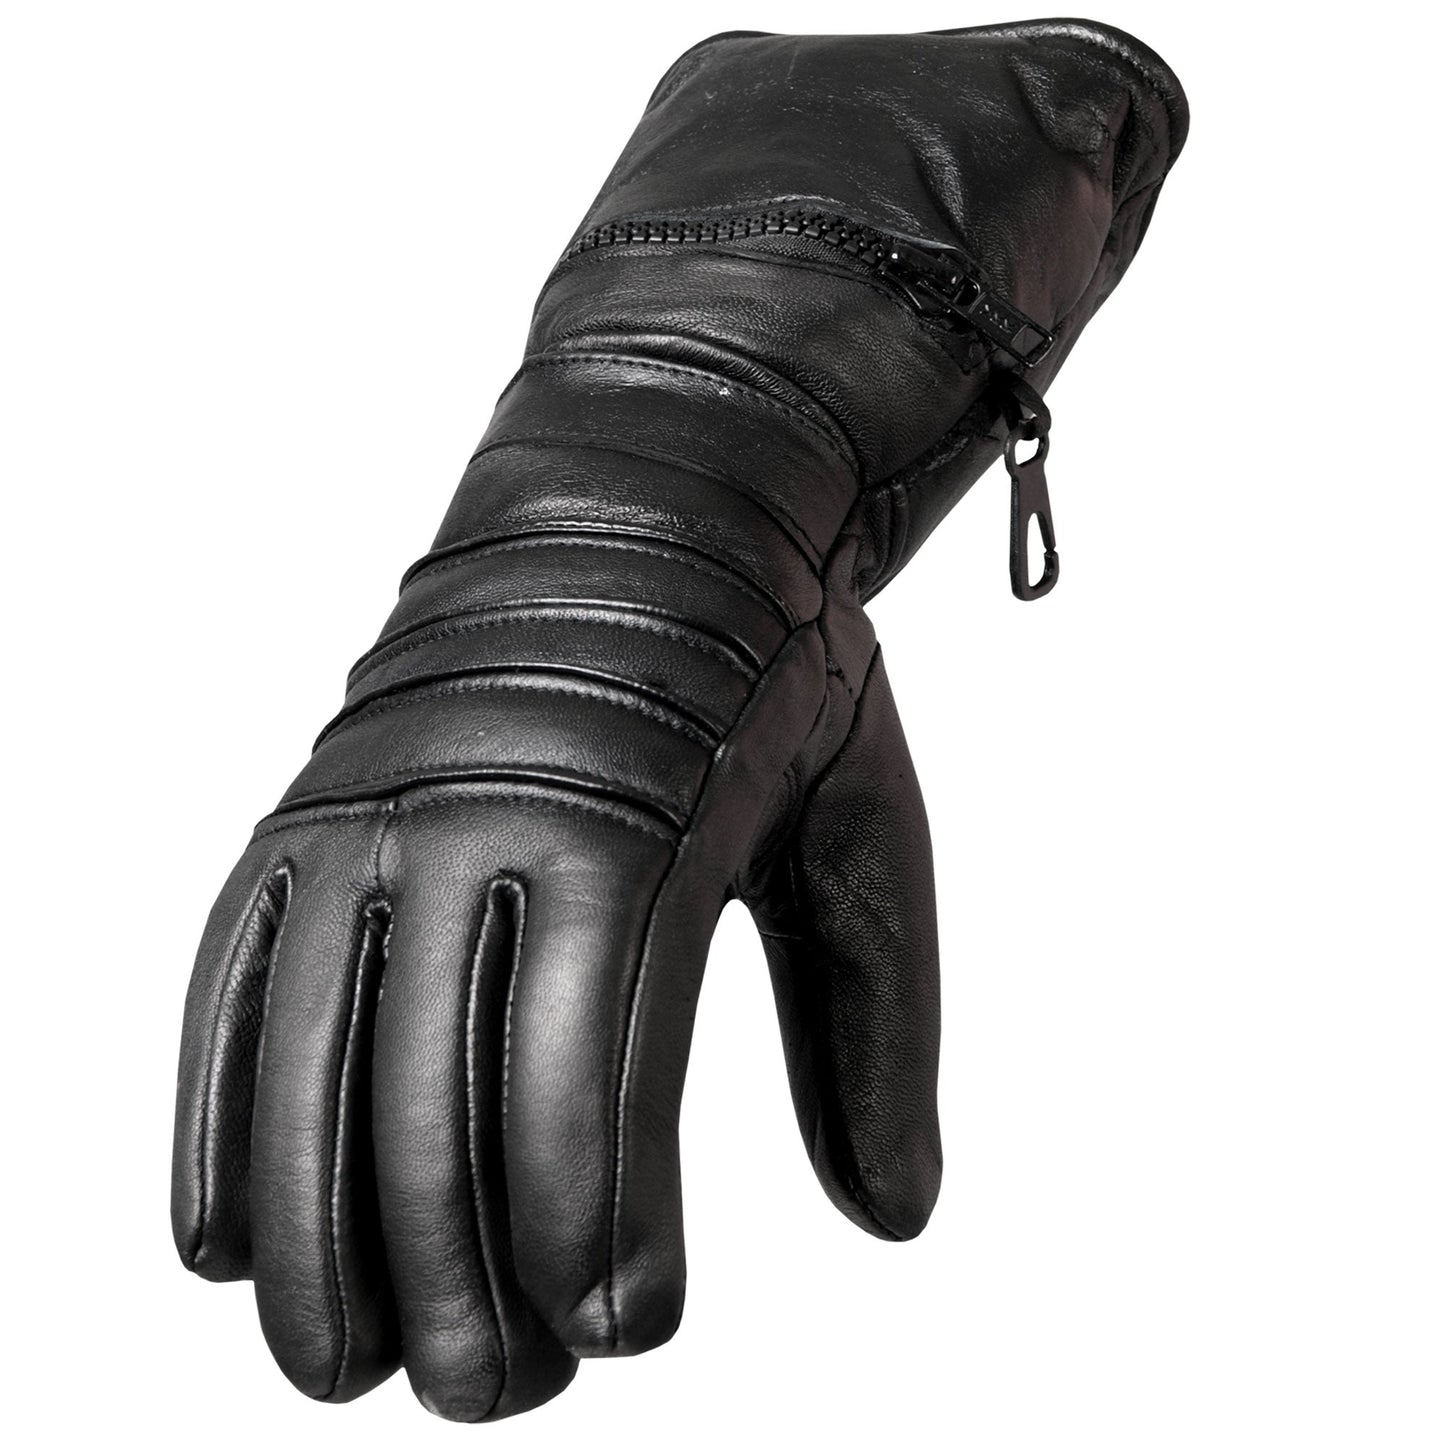 Men's Black Leather Gauntlet Glove with Quilted Lining